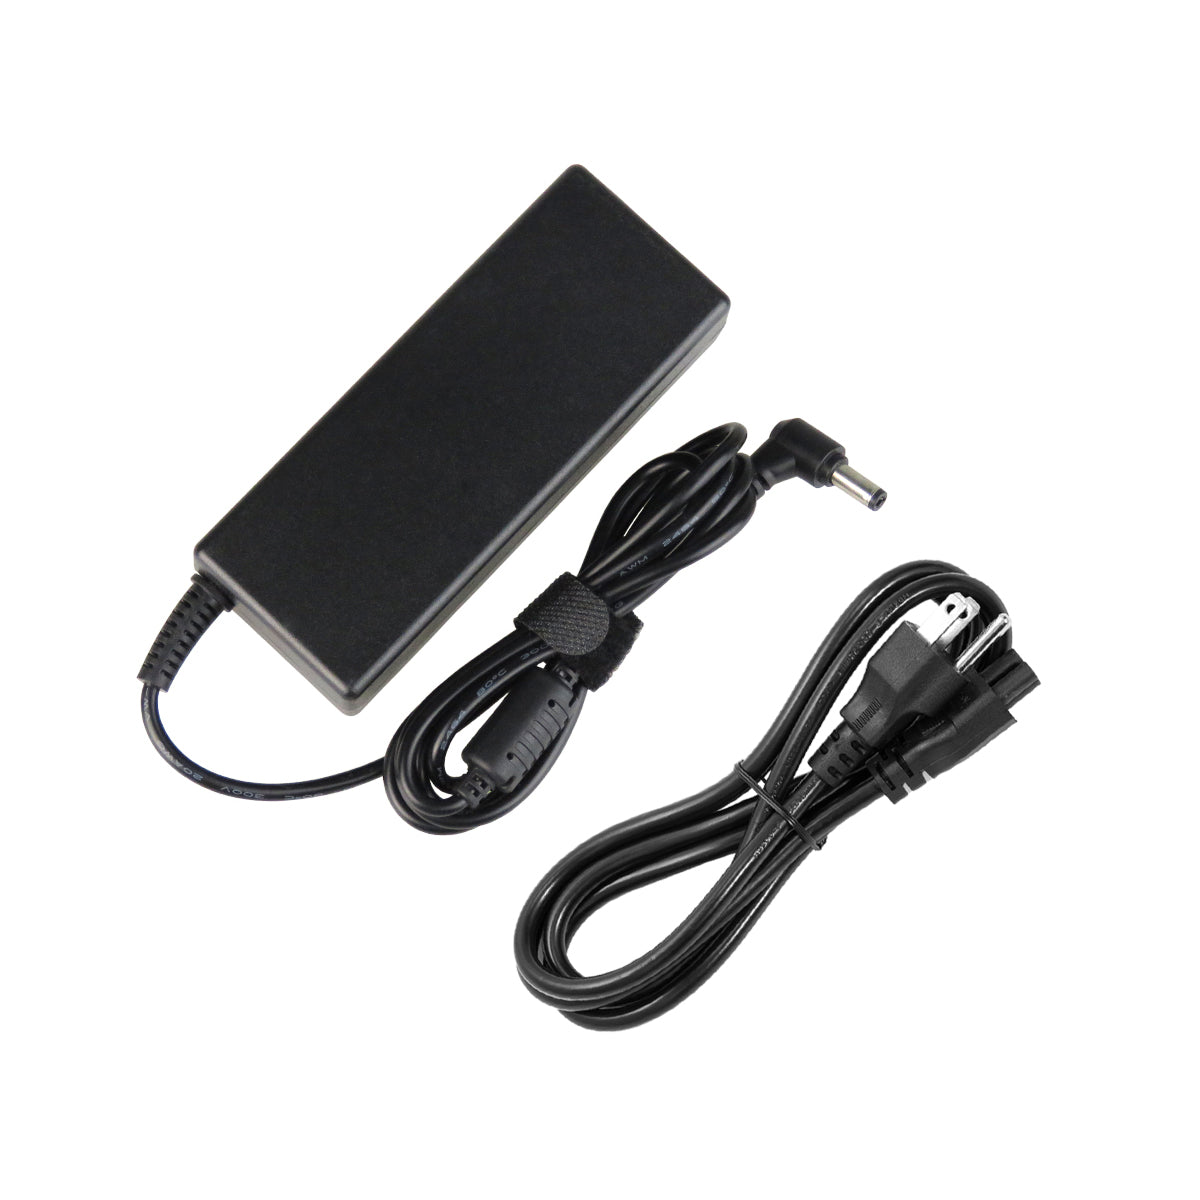 AC Adapter Charger for ASUS A83BY Laptop.